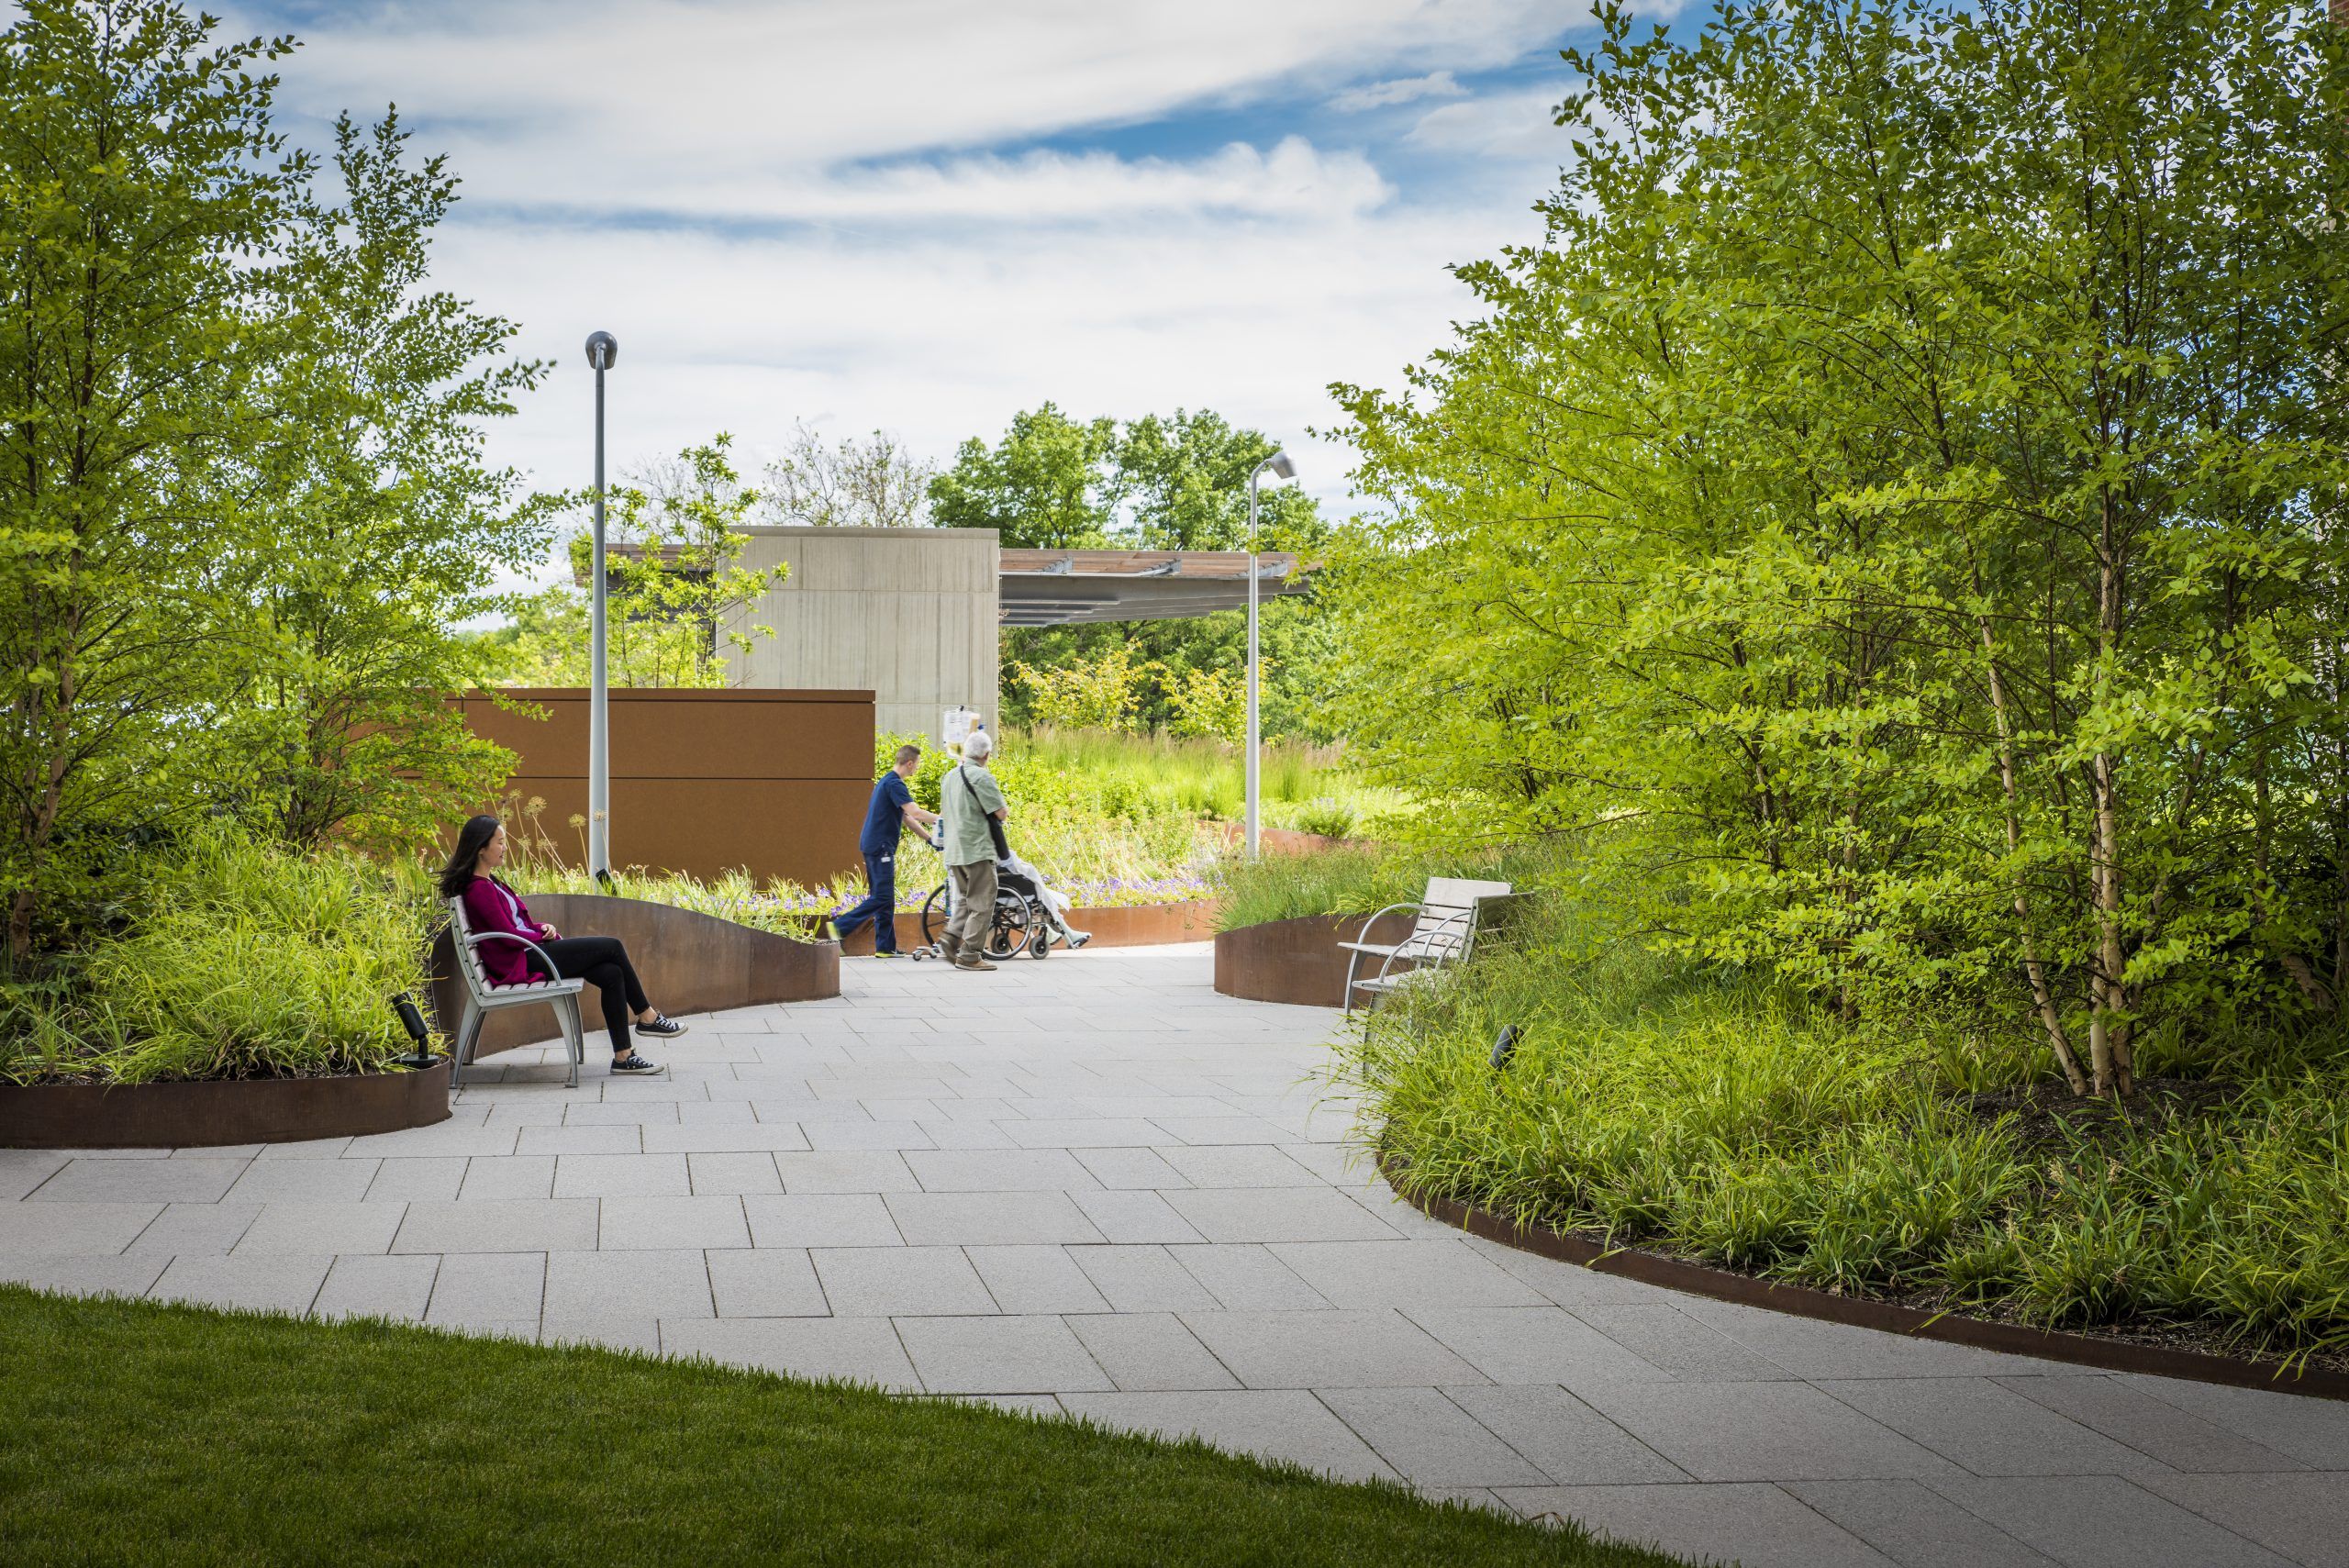 Nurse pushes patient in wheelchair through lit garden courtyard with smooth pavestone path and public seating